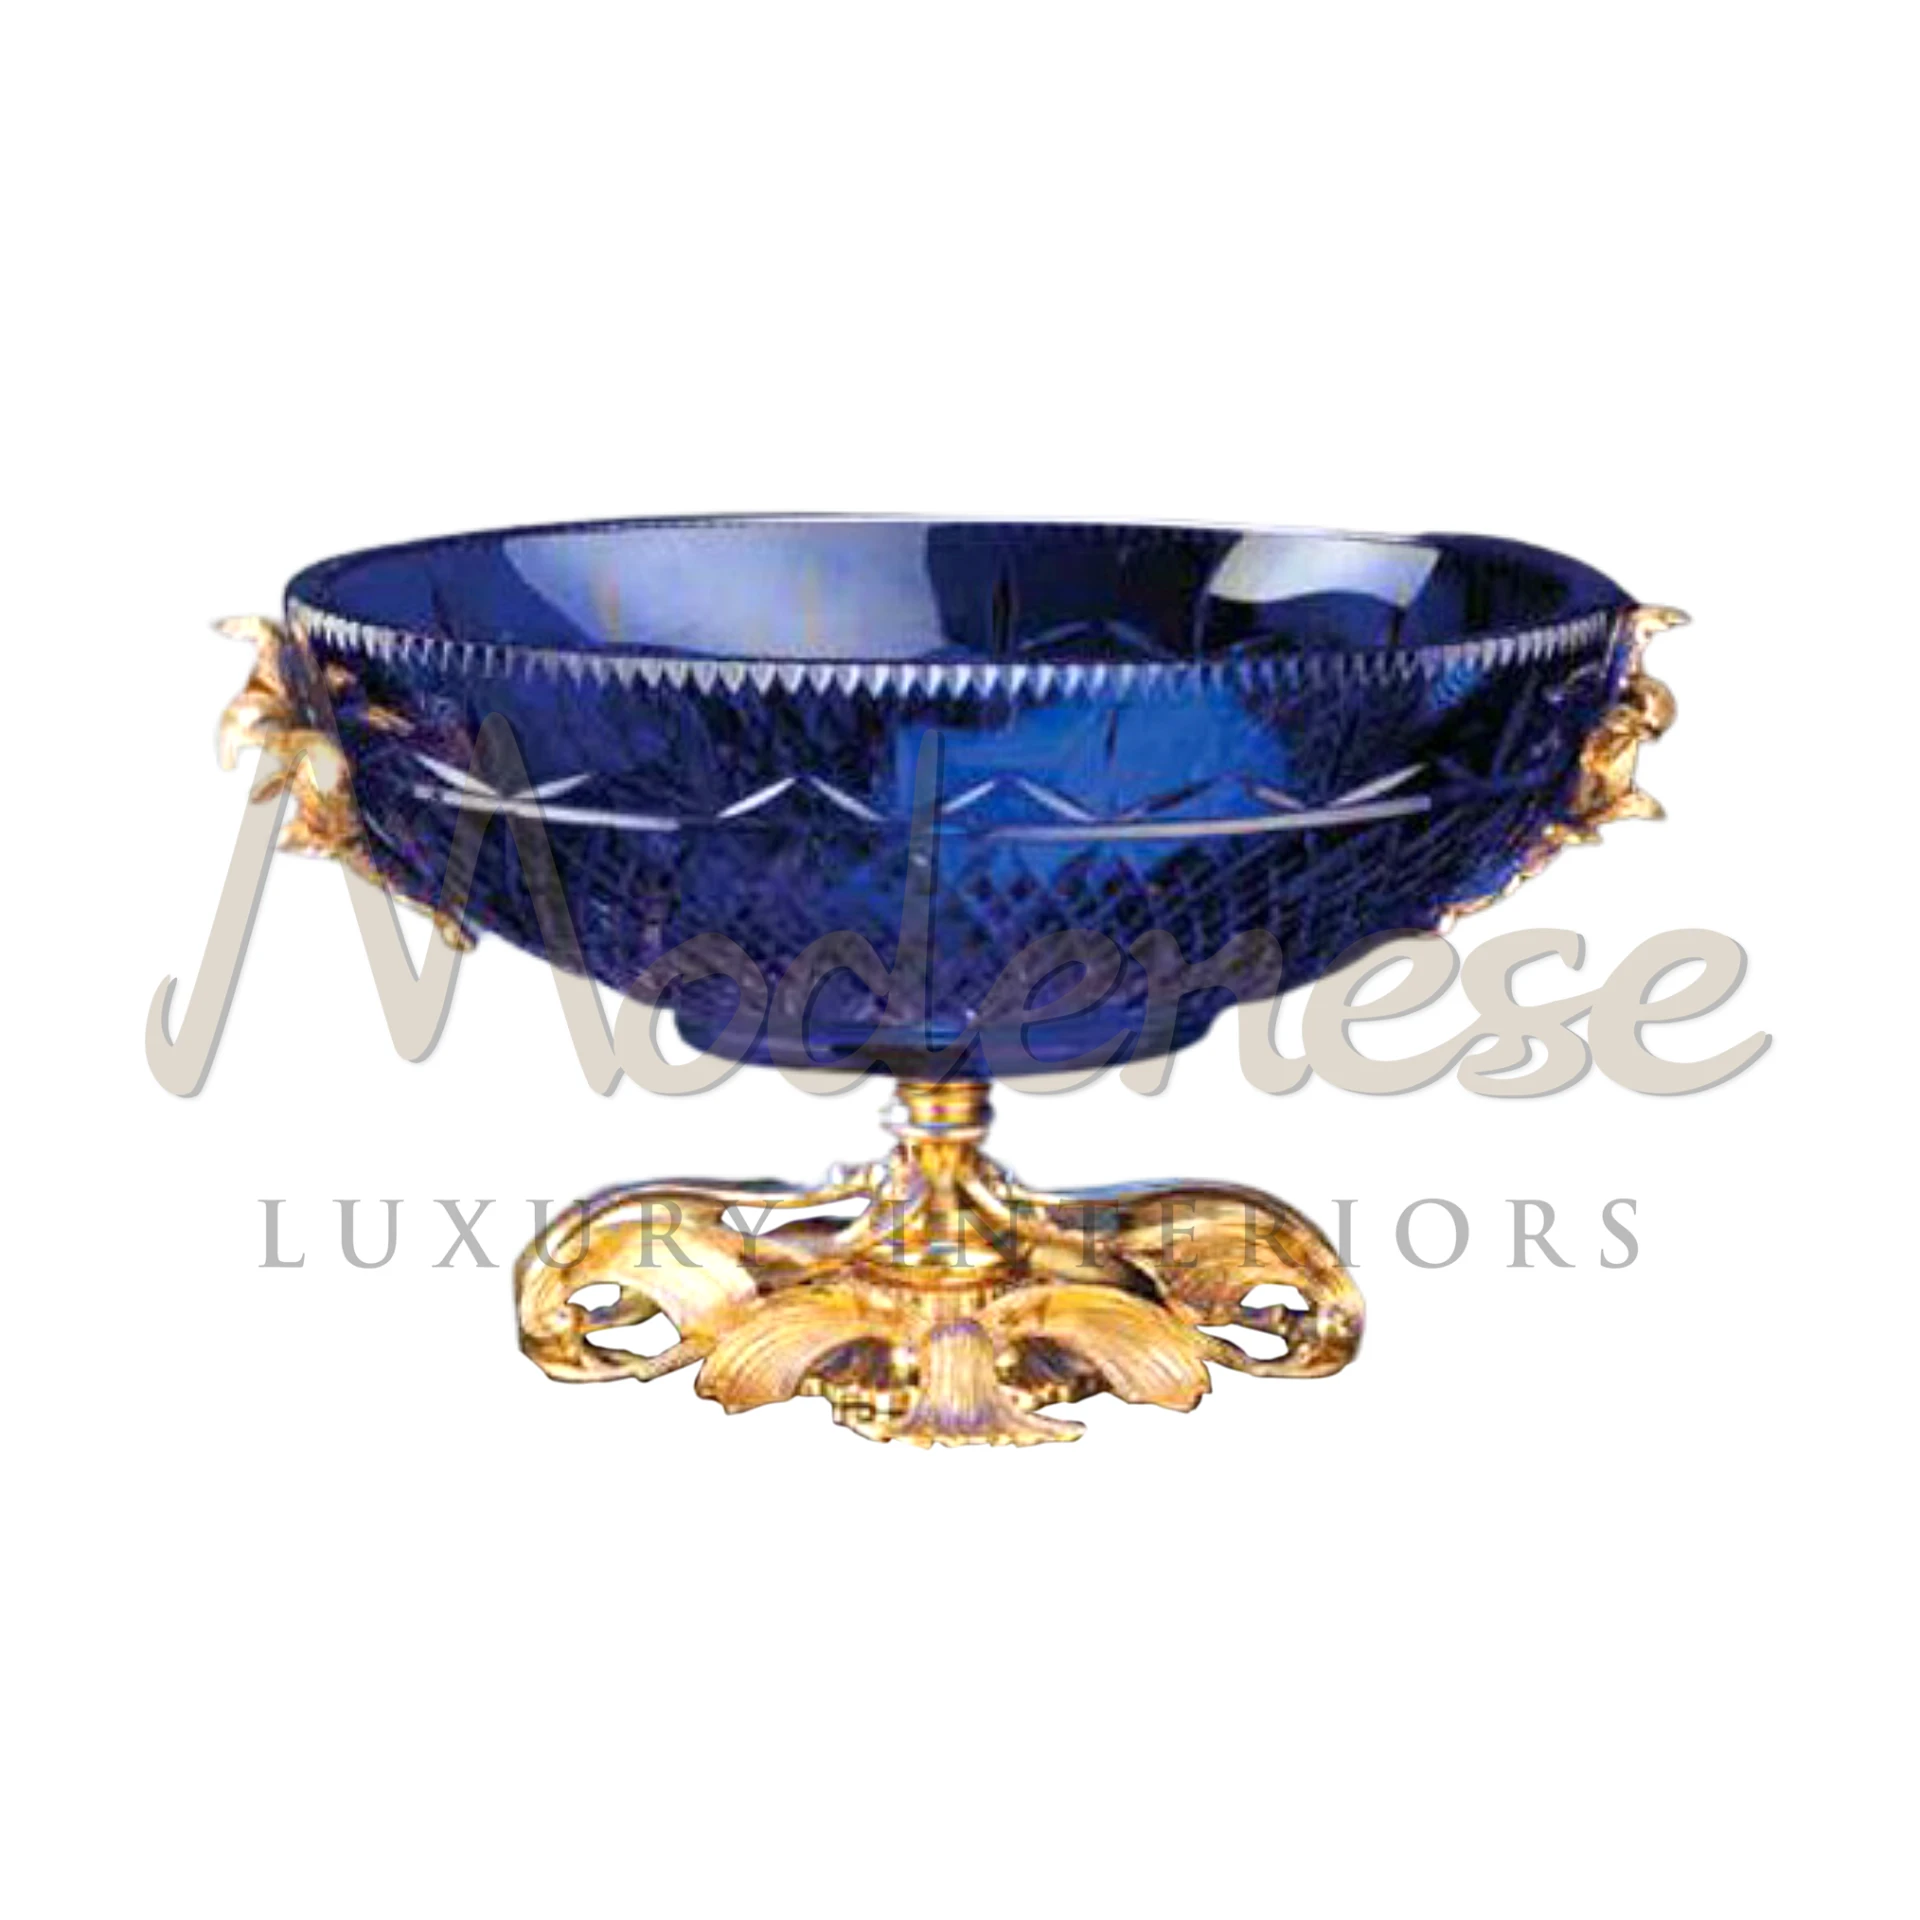 Classical Royal Blue Bowl, a masterpiece of elegance and opulence in ceramic, glass, or metal, ideal for enhancing luxury interiors with classic and baroque style.






